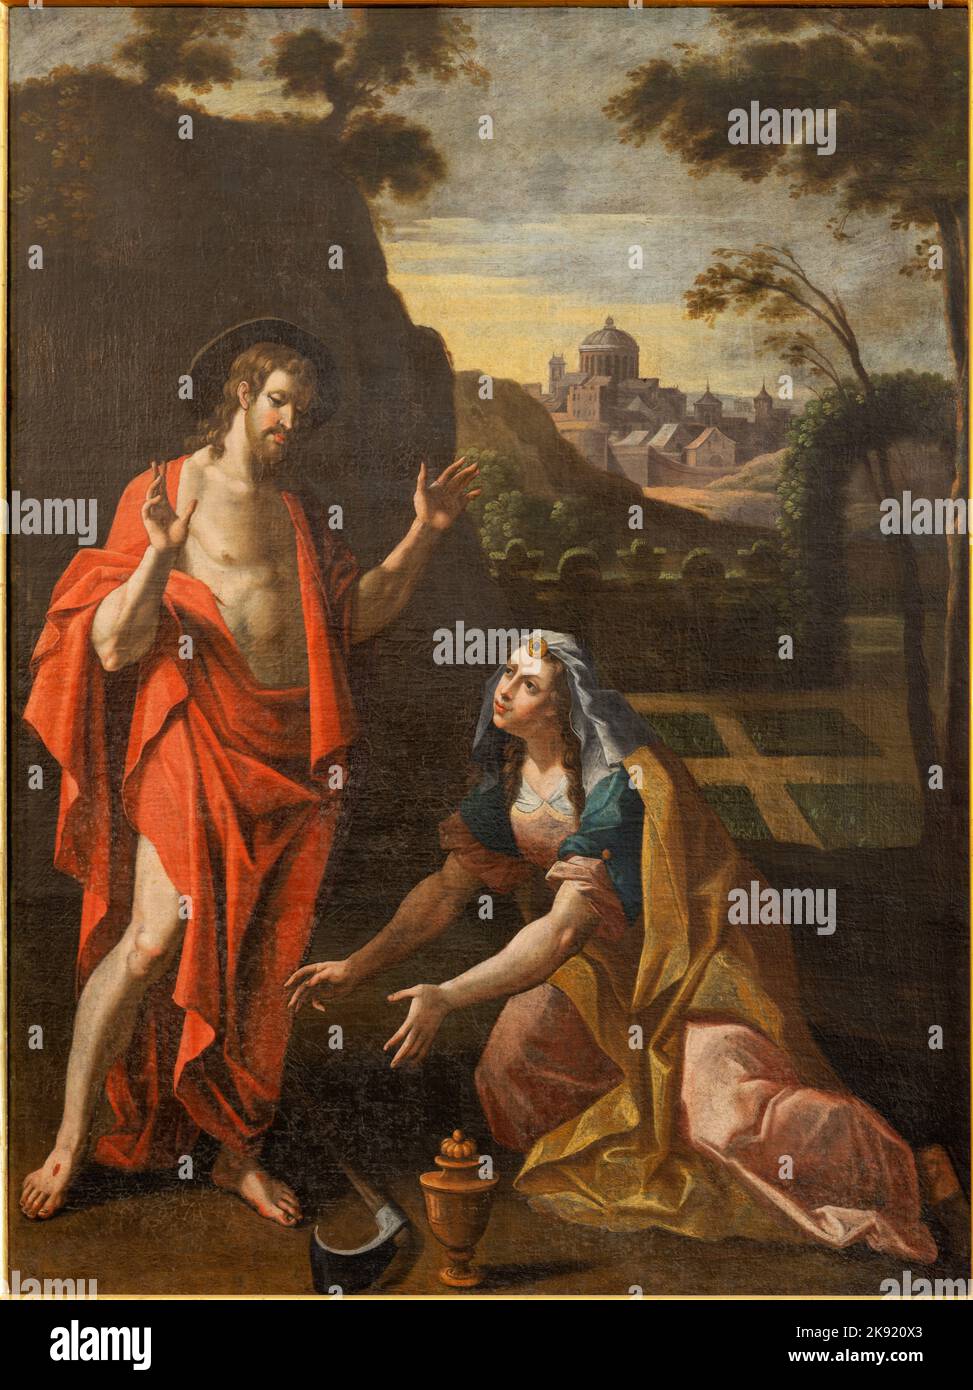 CHAMONIX, FRANCE - JULY 5, 2022: The painting Jesus Appears to Mary Magdalene in the church St. Michael by unknown artist of 17. cent. Stock Photo